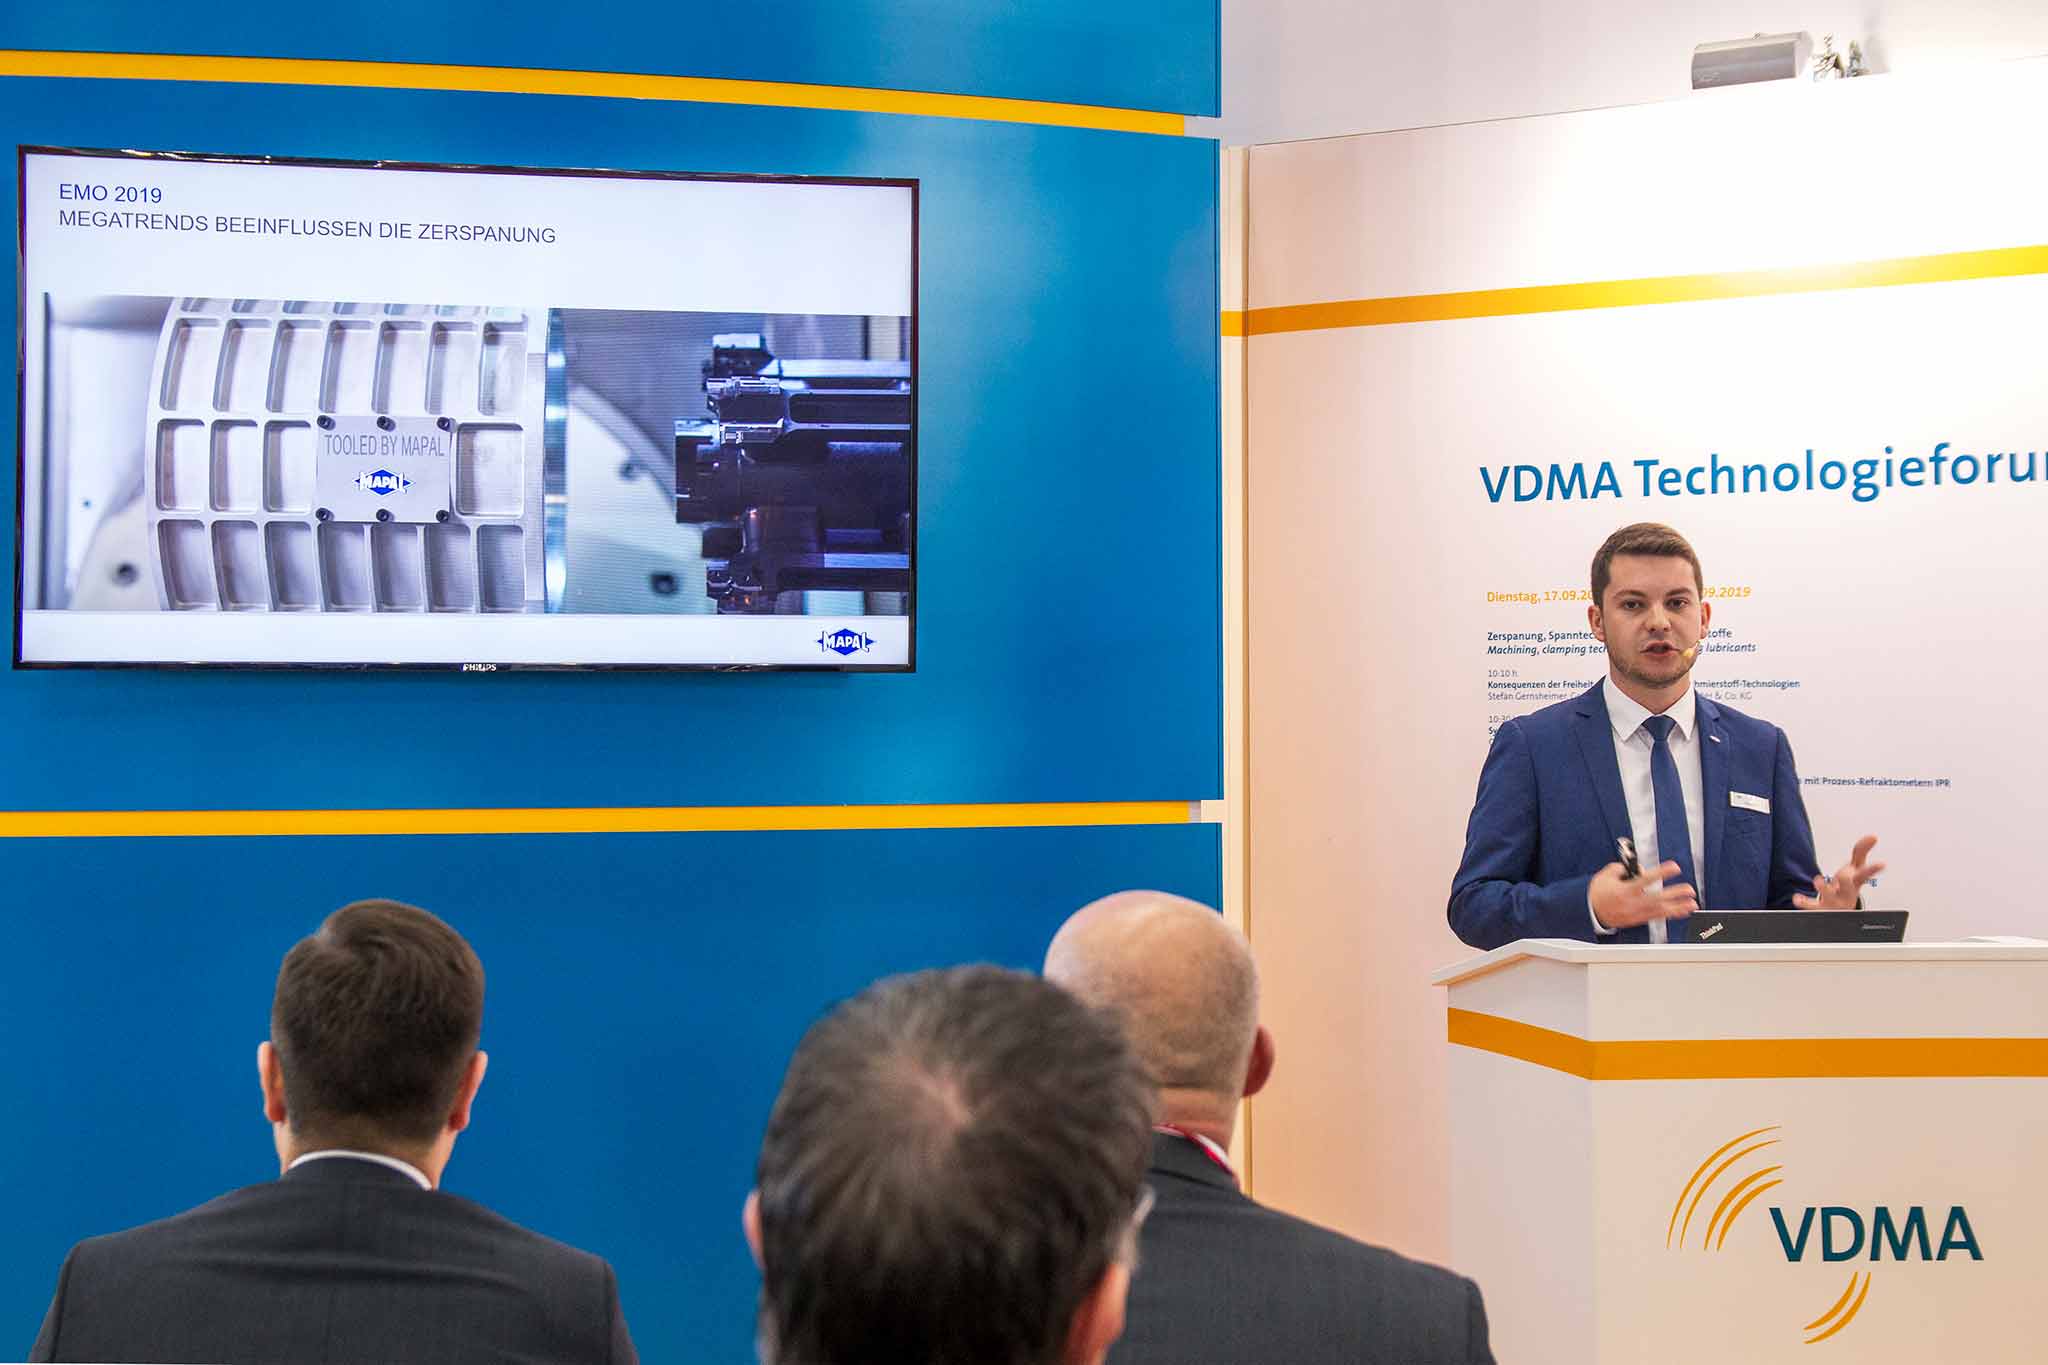 Dennis Minder speaks at the VDMA Technology Forum. He is pictured on the right side of the image, his presentation is shown in large on the left.